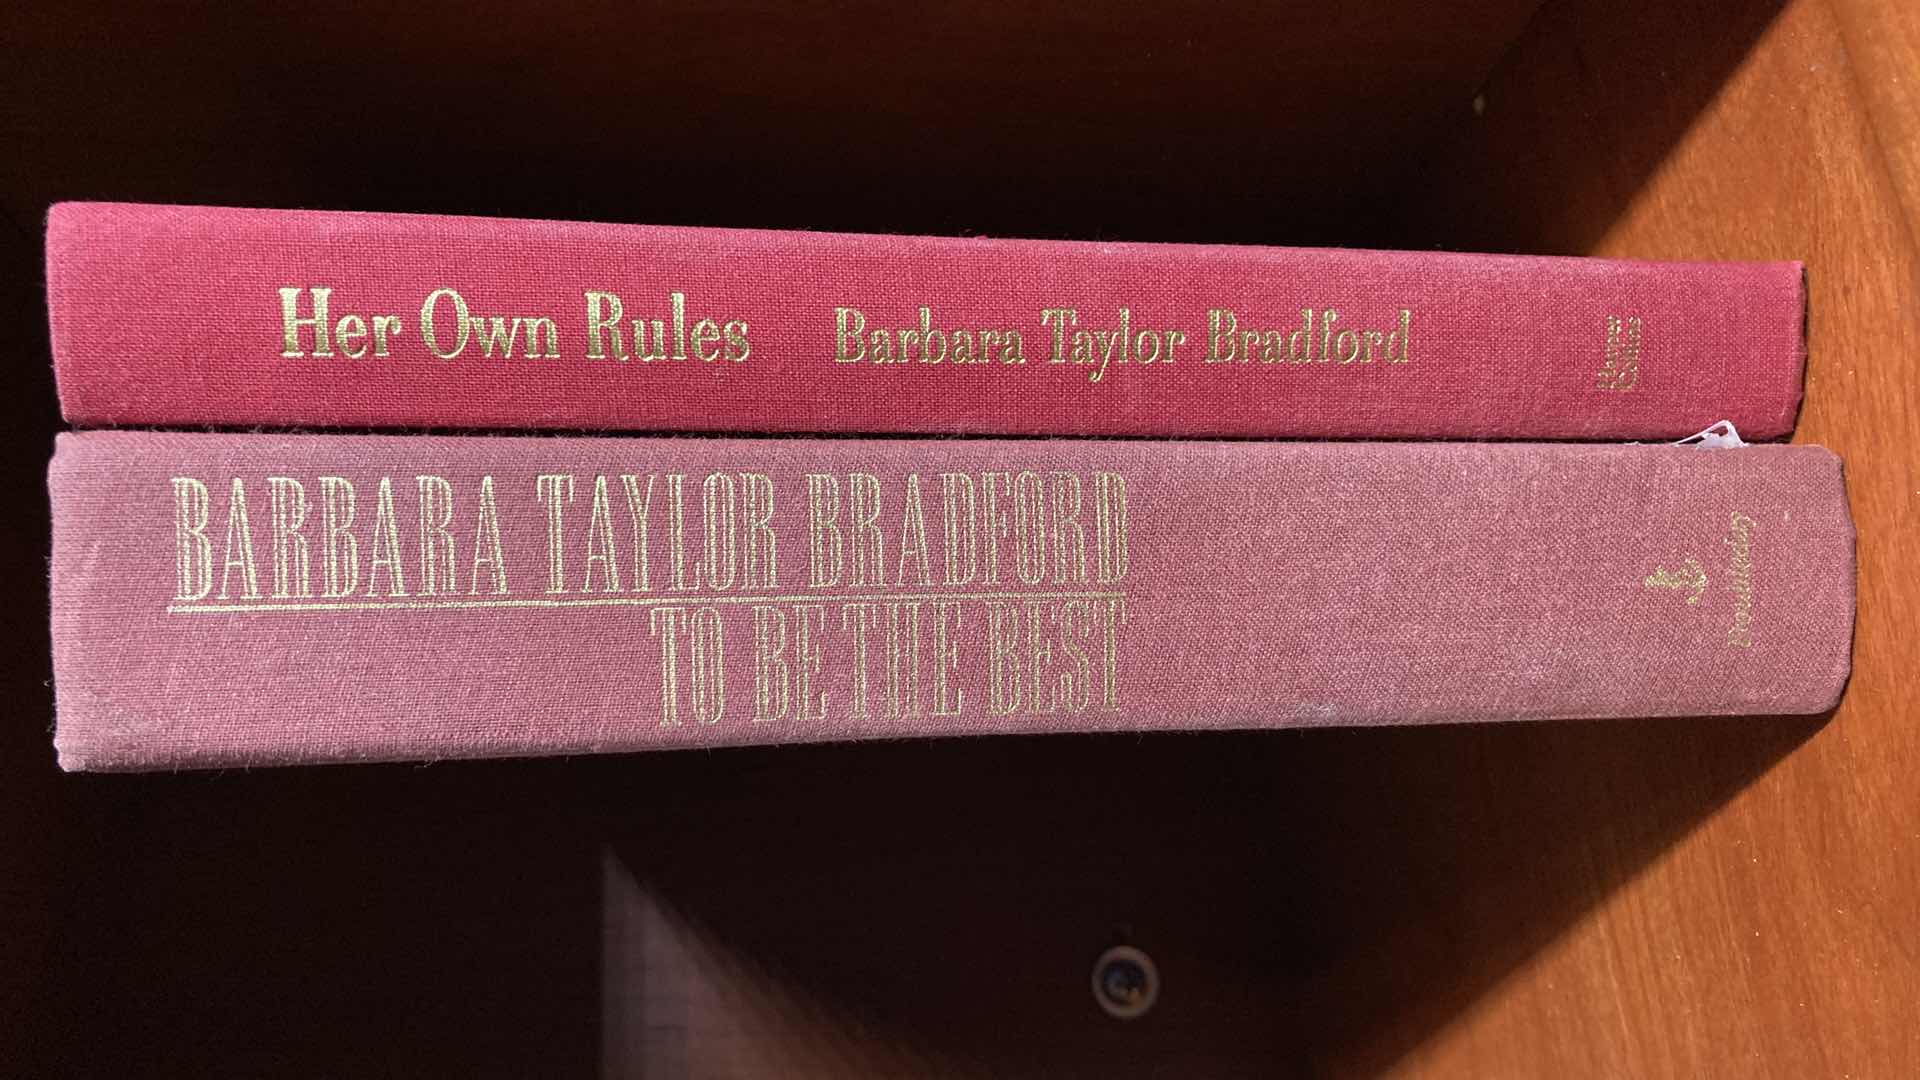 Photo 3 of TAYLOR BRADFORD LEATHER HARD COVER BOOKS (5)